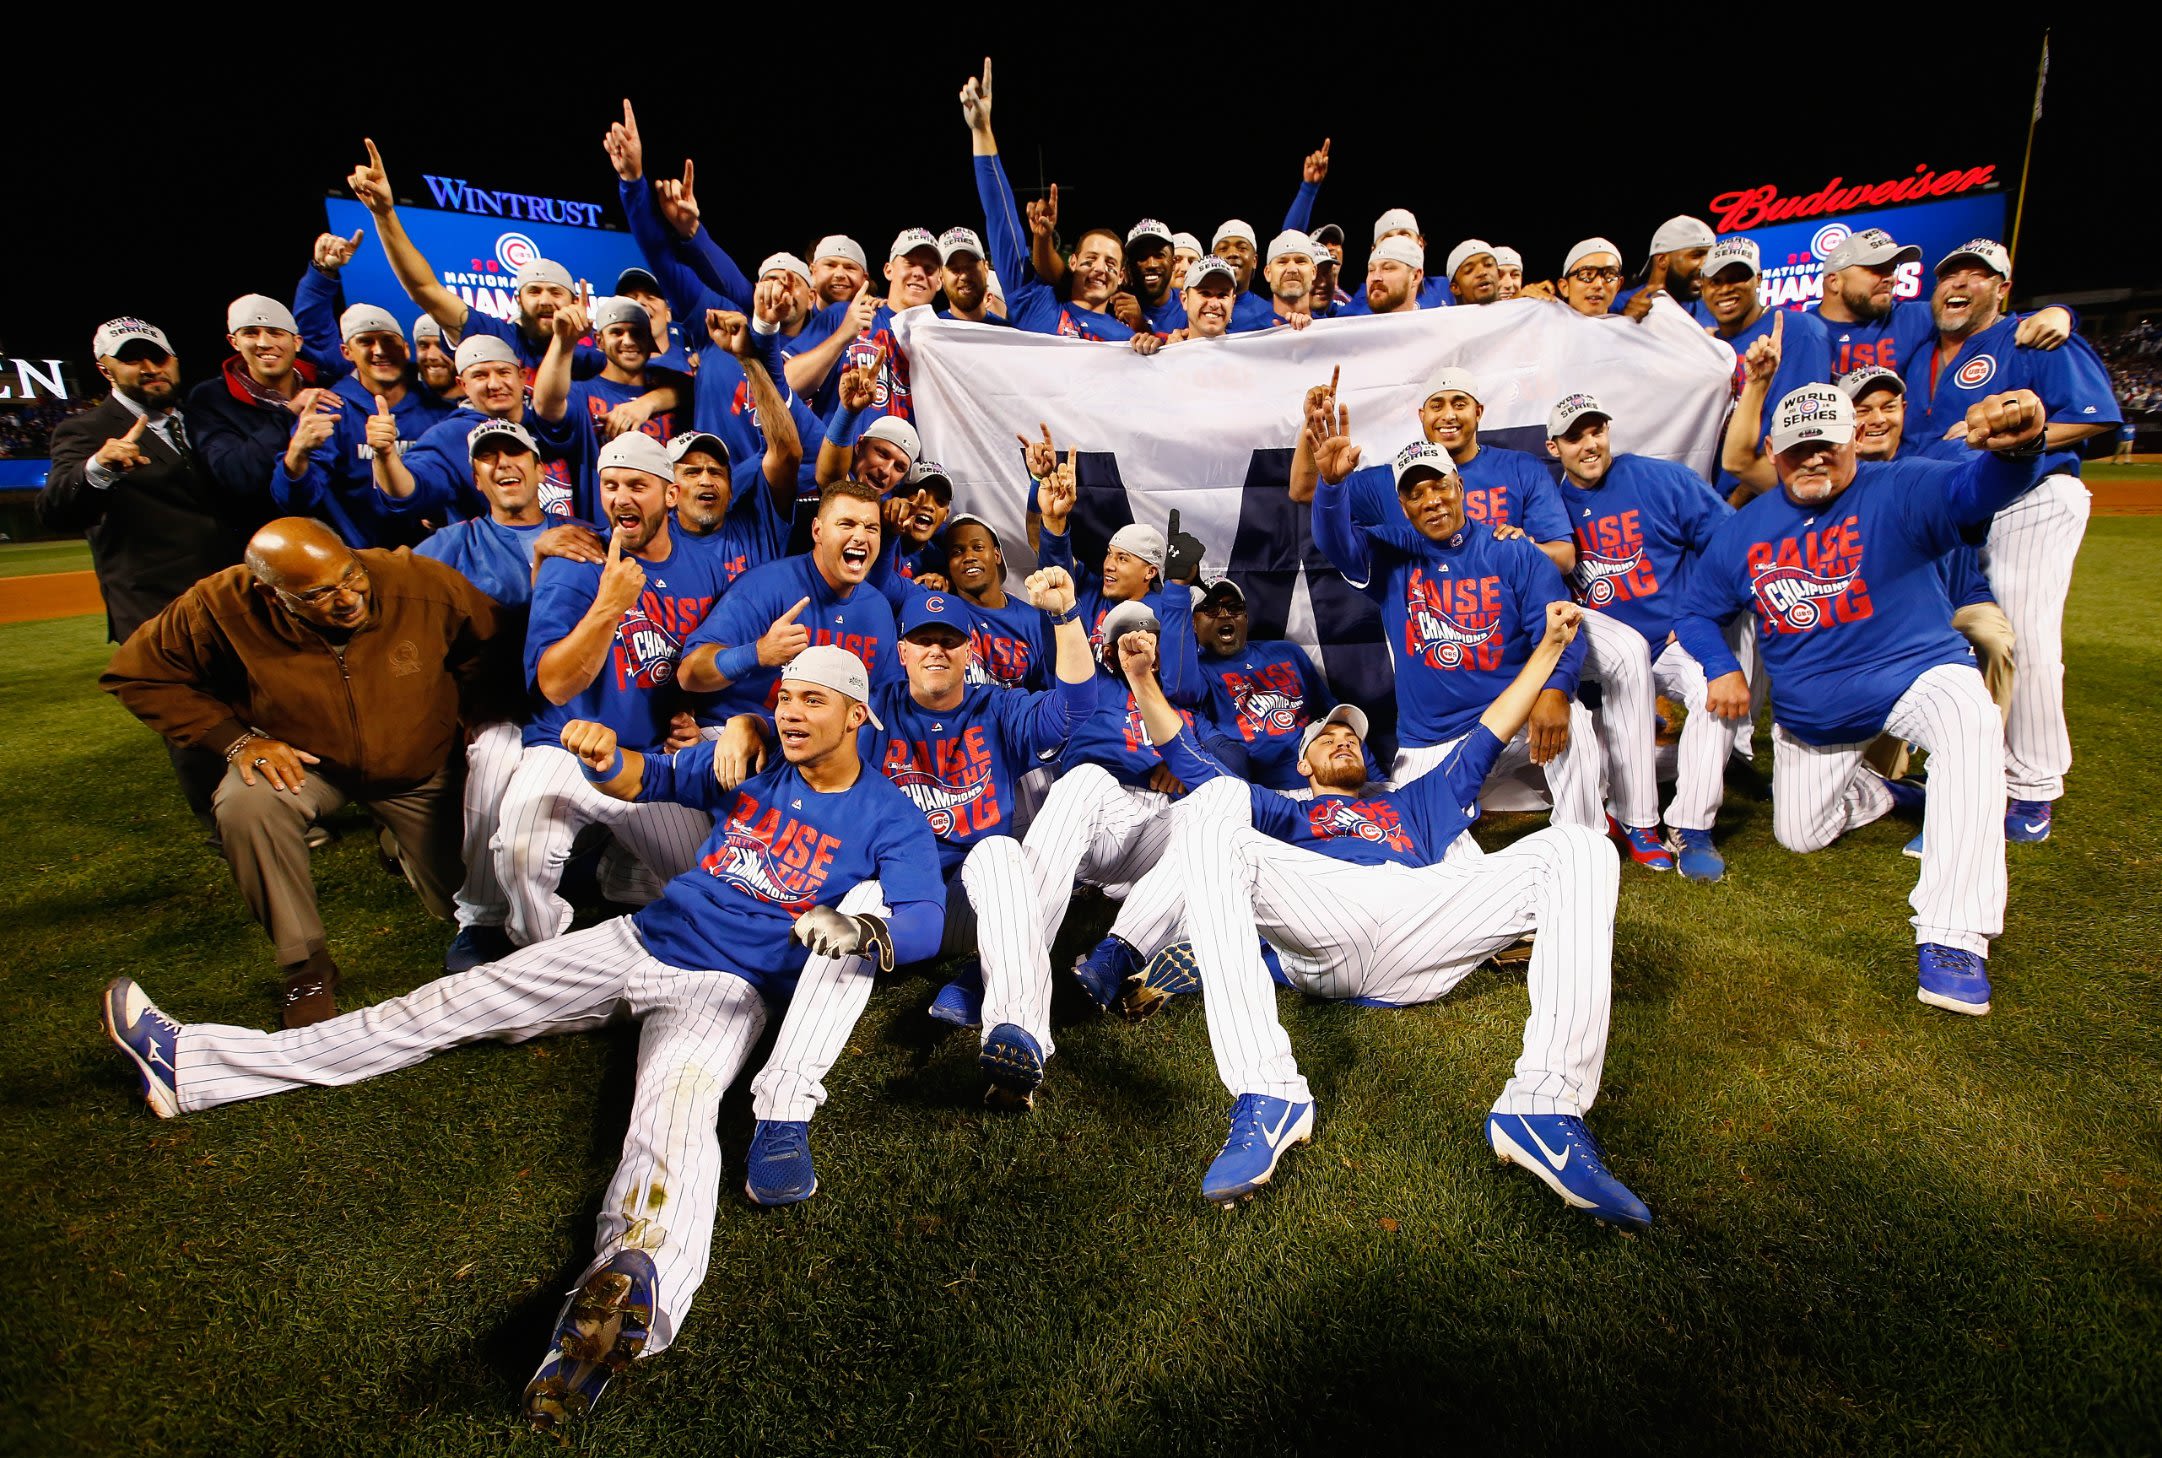 THIS: Cubs advance to first World Series since 1945 